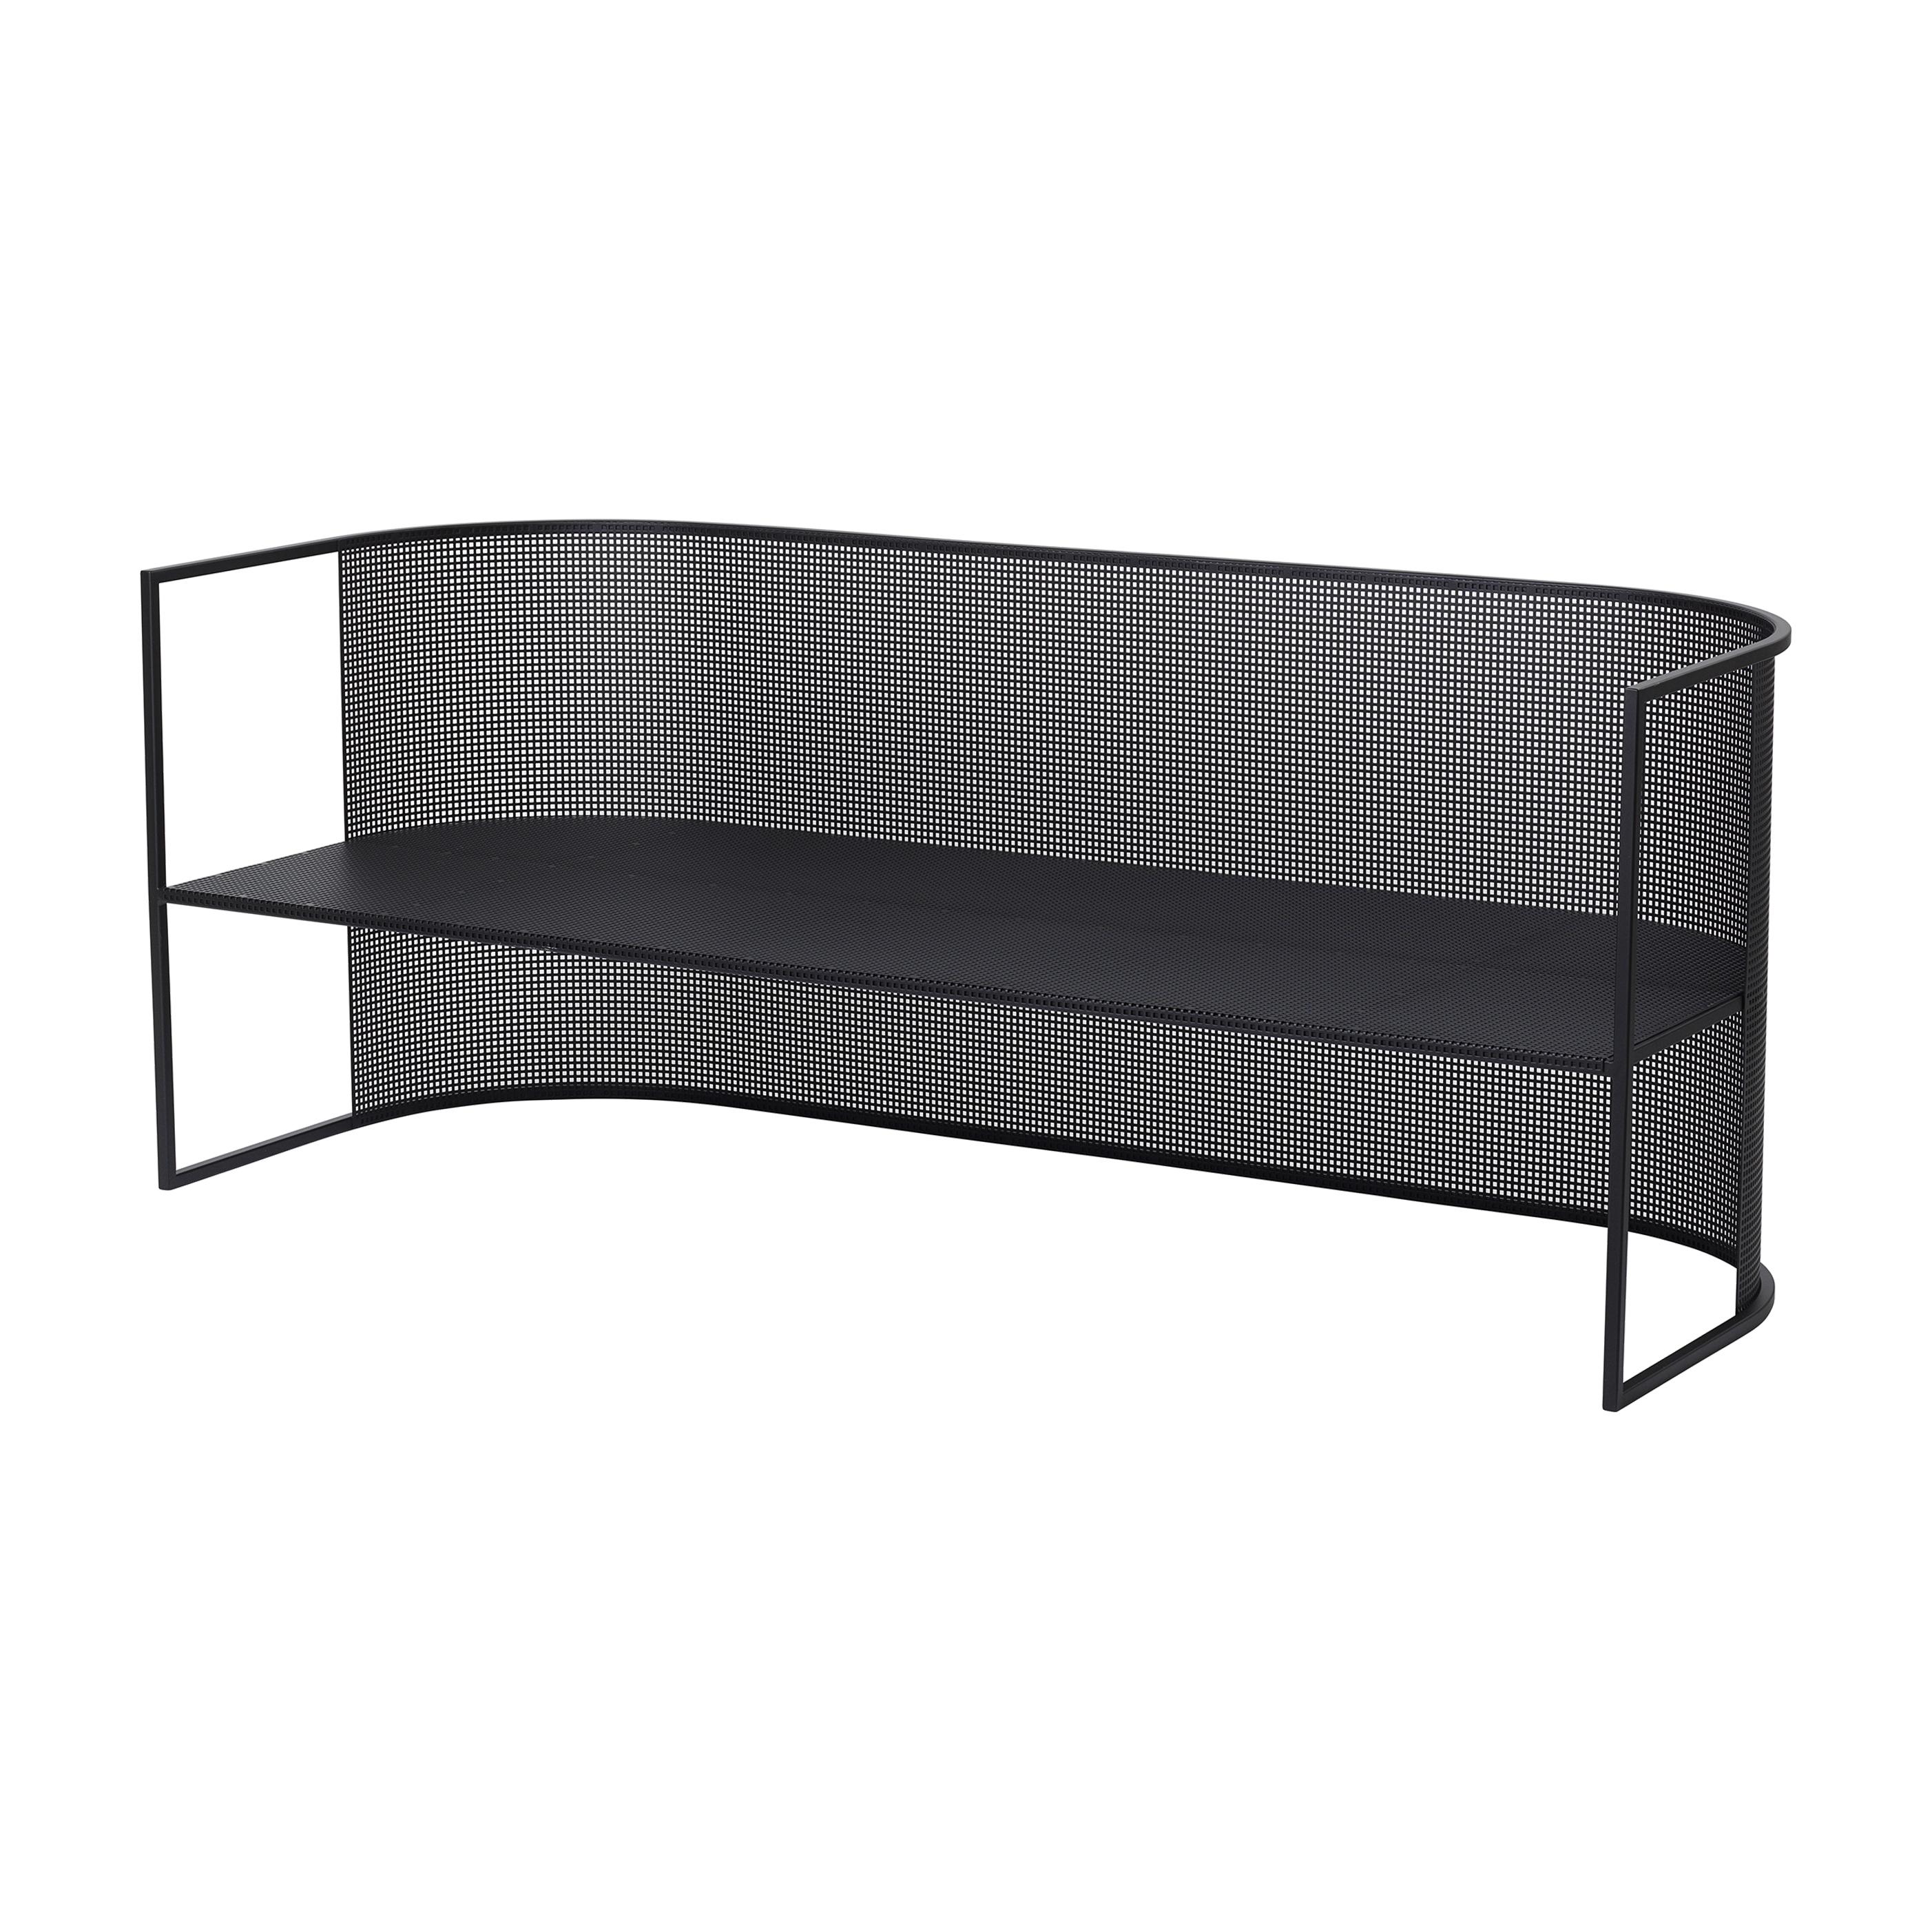 Black steel Bahaus lounge bench by Kristina Dam Studio
Materials: Black outdoor powder-coated steel
Dimensions: 170 x 67 x 64 cm

*Safe to use outdoor.

Kristina Dam graduated from The Royal Danish School of Fine Arts, Architecture and Design